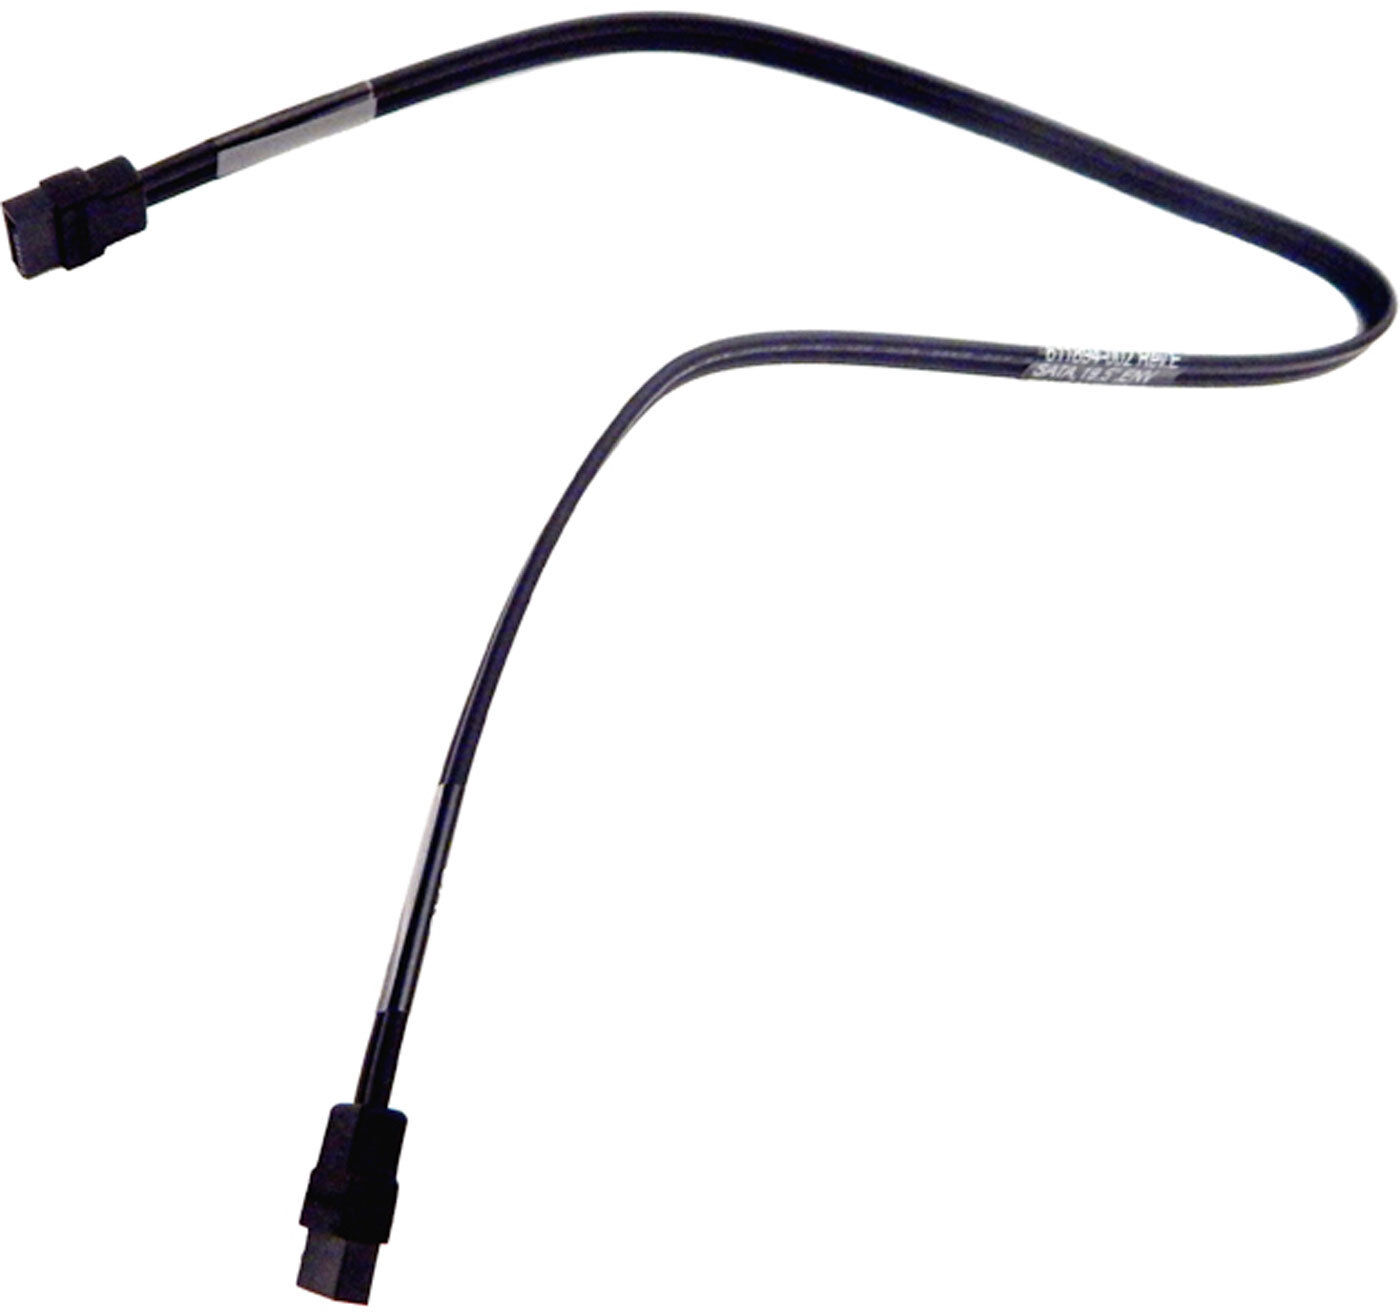 HP Compaq 19in Straight Ends SATA Cable 611894-002 ENV 495mm Black